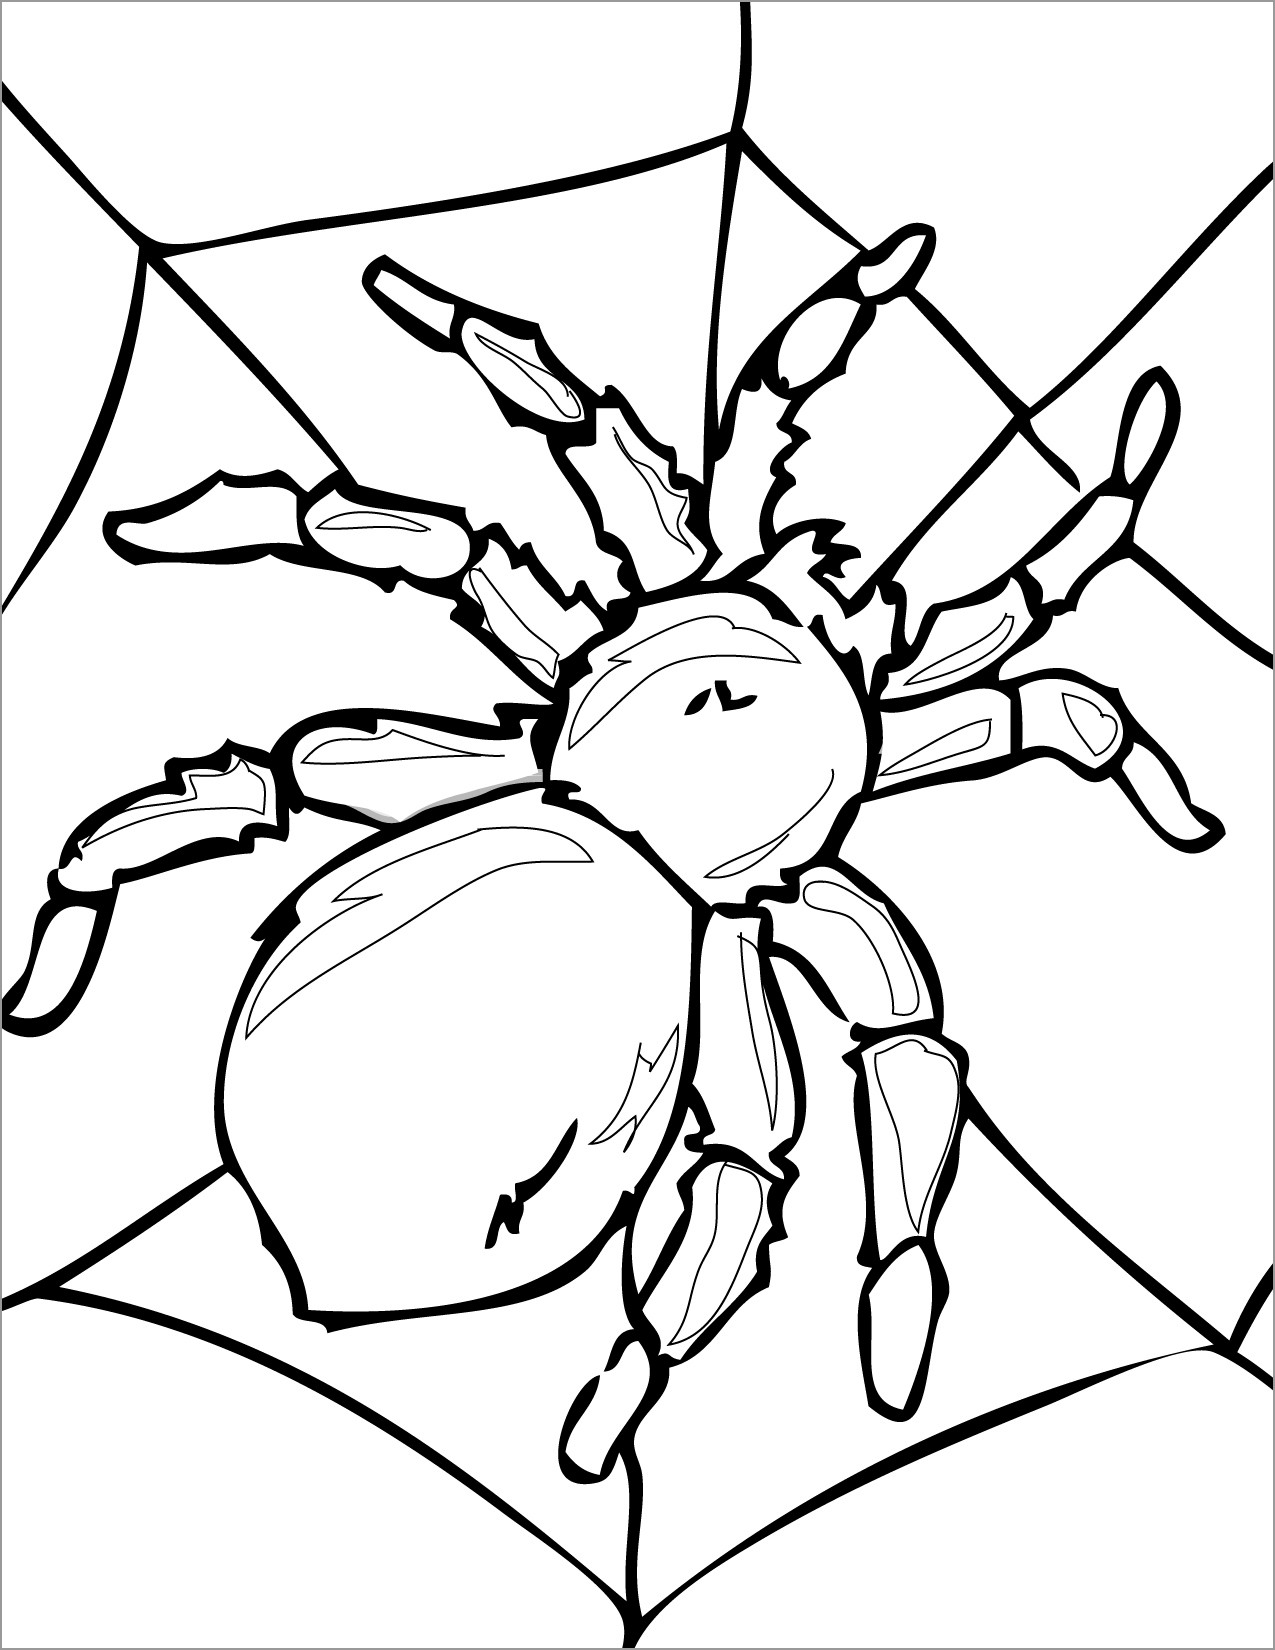 Spider Insect Coloring Page